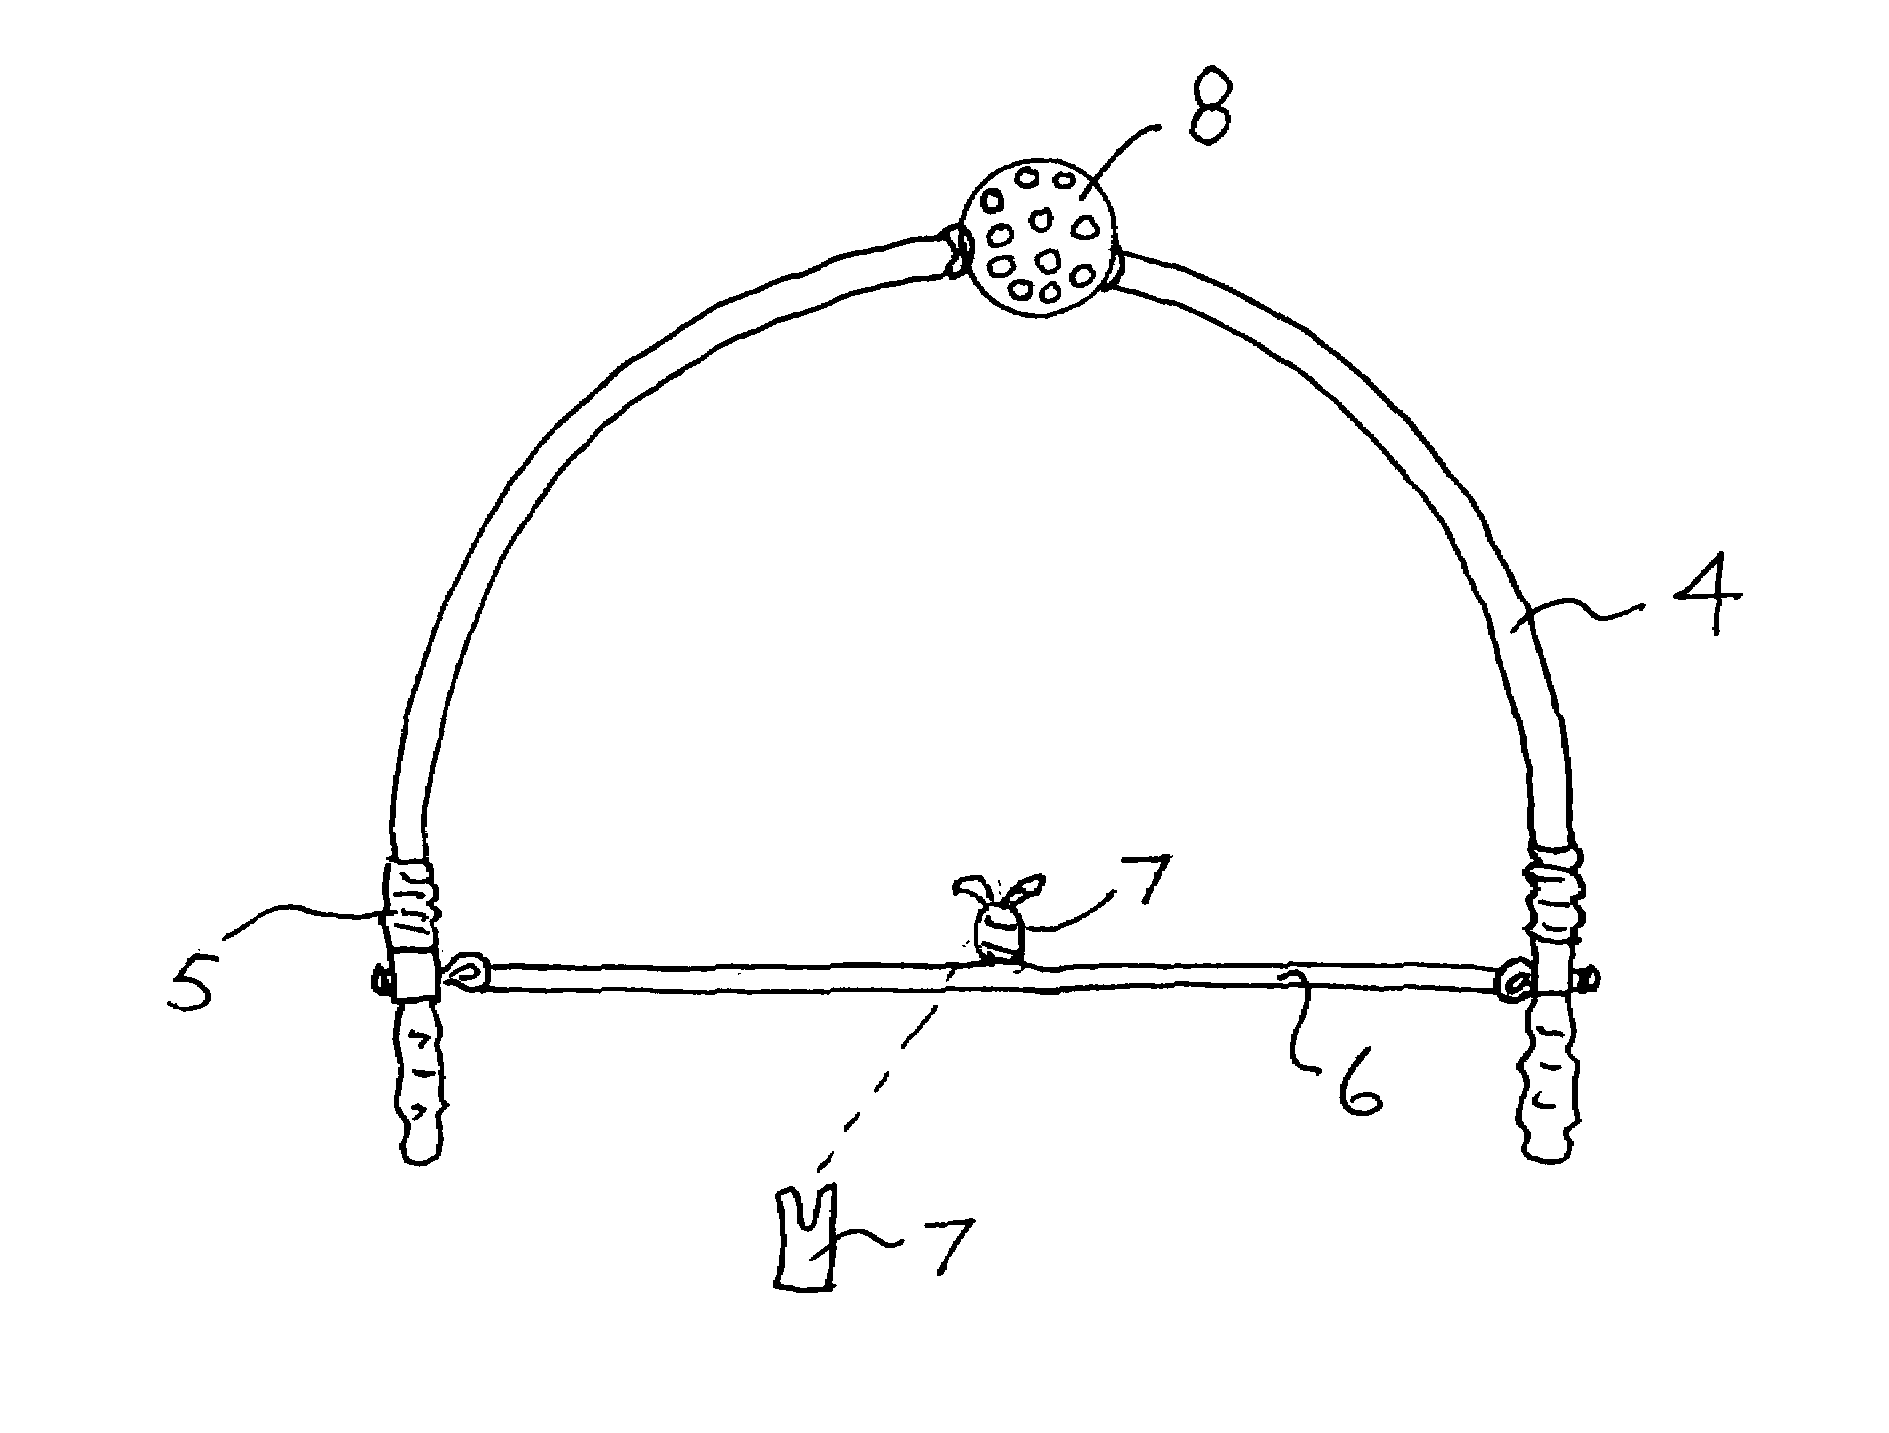 Exerciser and massager apparatus